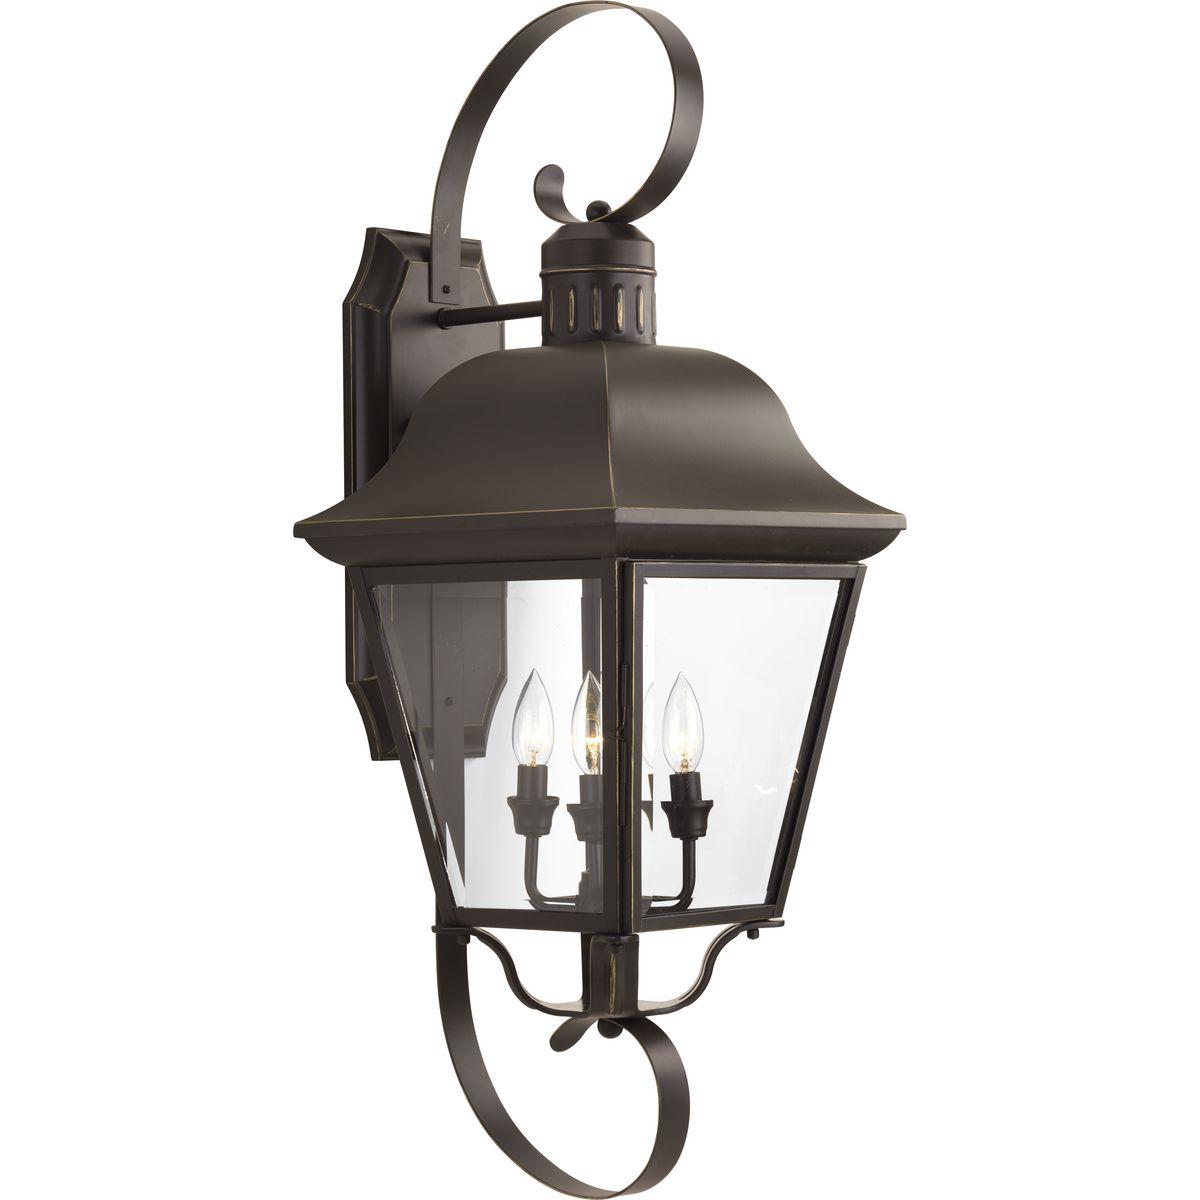 Hubbell P5627-20 The Andover collection four-light extra-large wall lantern with aluminum construction, offers a mixture of traditional and country style for a variety of applications. Beveled glass panels allow optimum brightness. Hinged door for easy relamping.  ; Lante